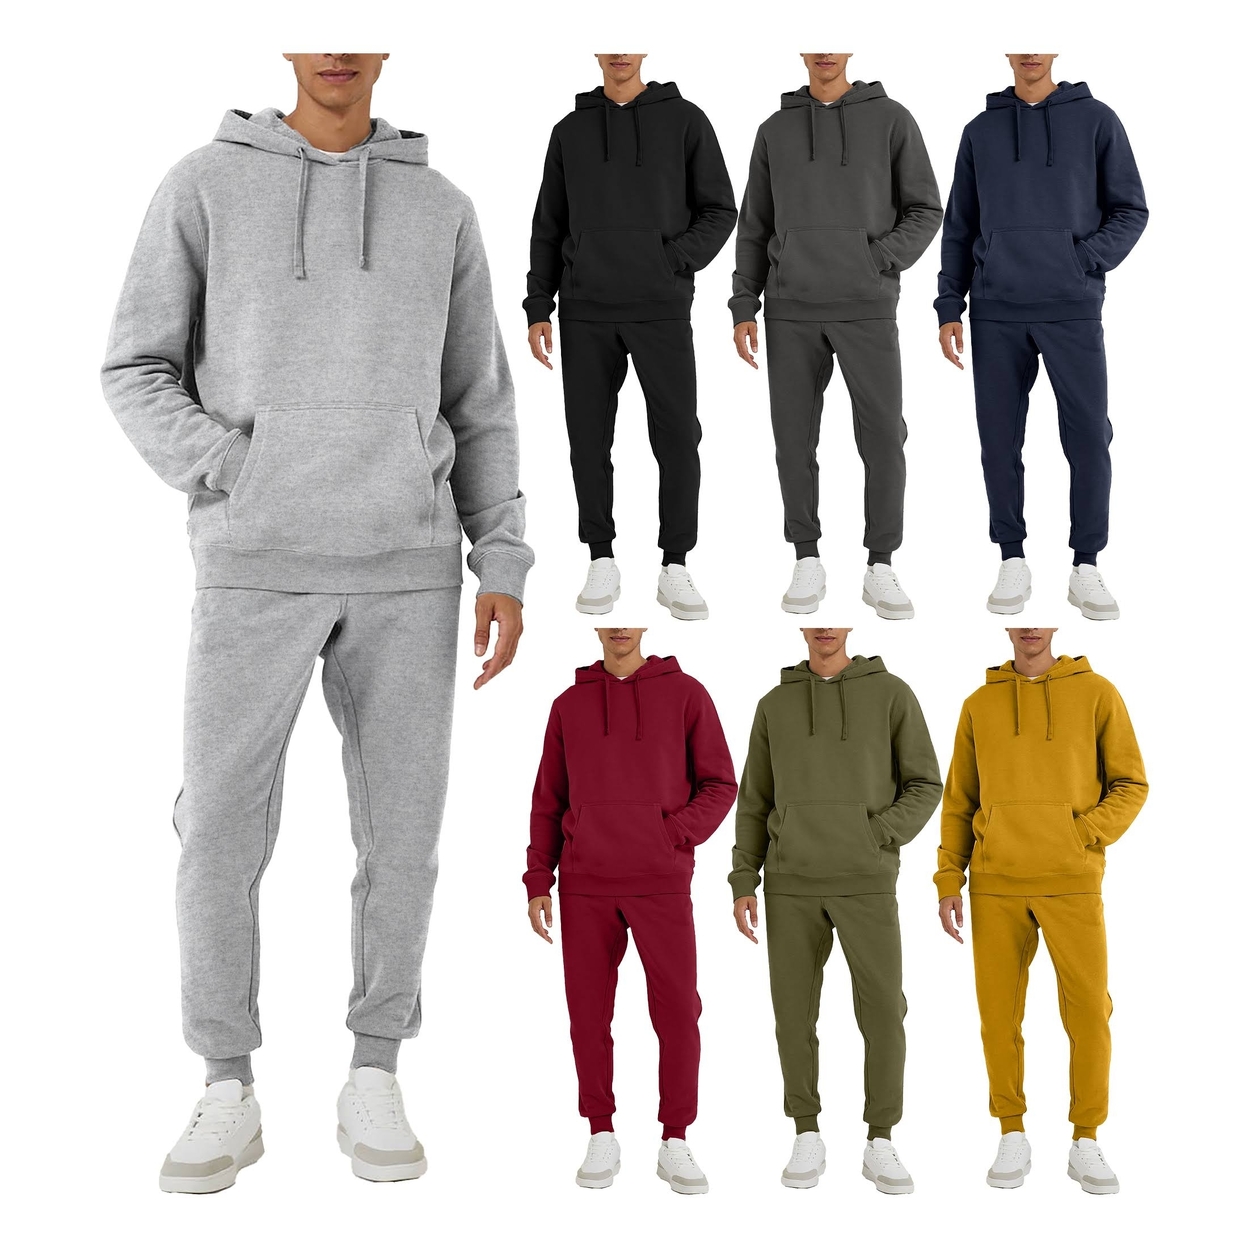 Men's Big & Tall Athletic Active Jogging Winter Warm Fleece Lined Pullover Tracksuit Set - Charcoal, Small